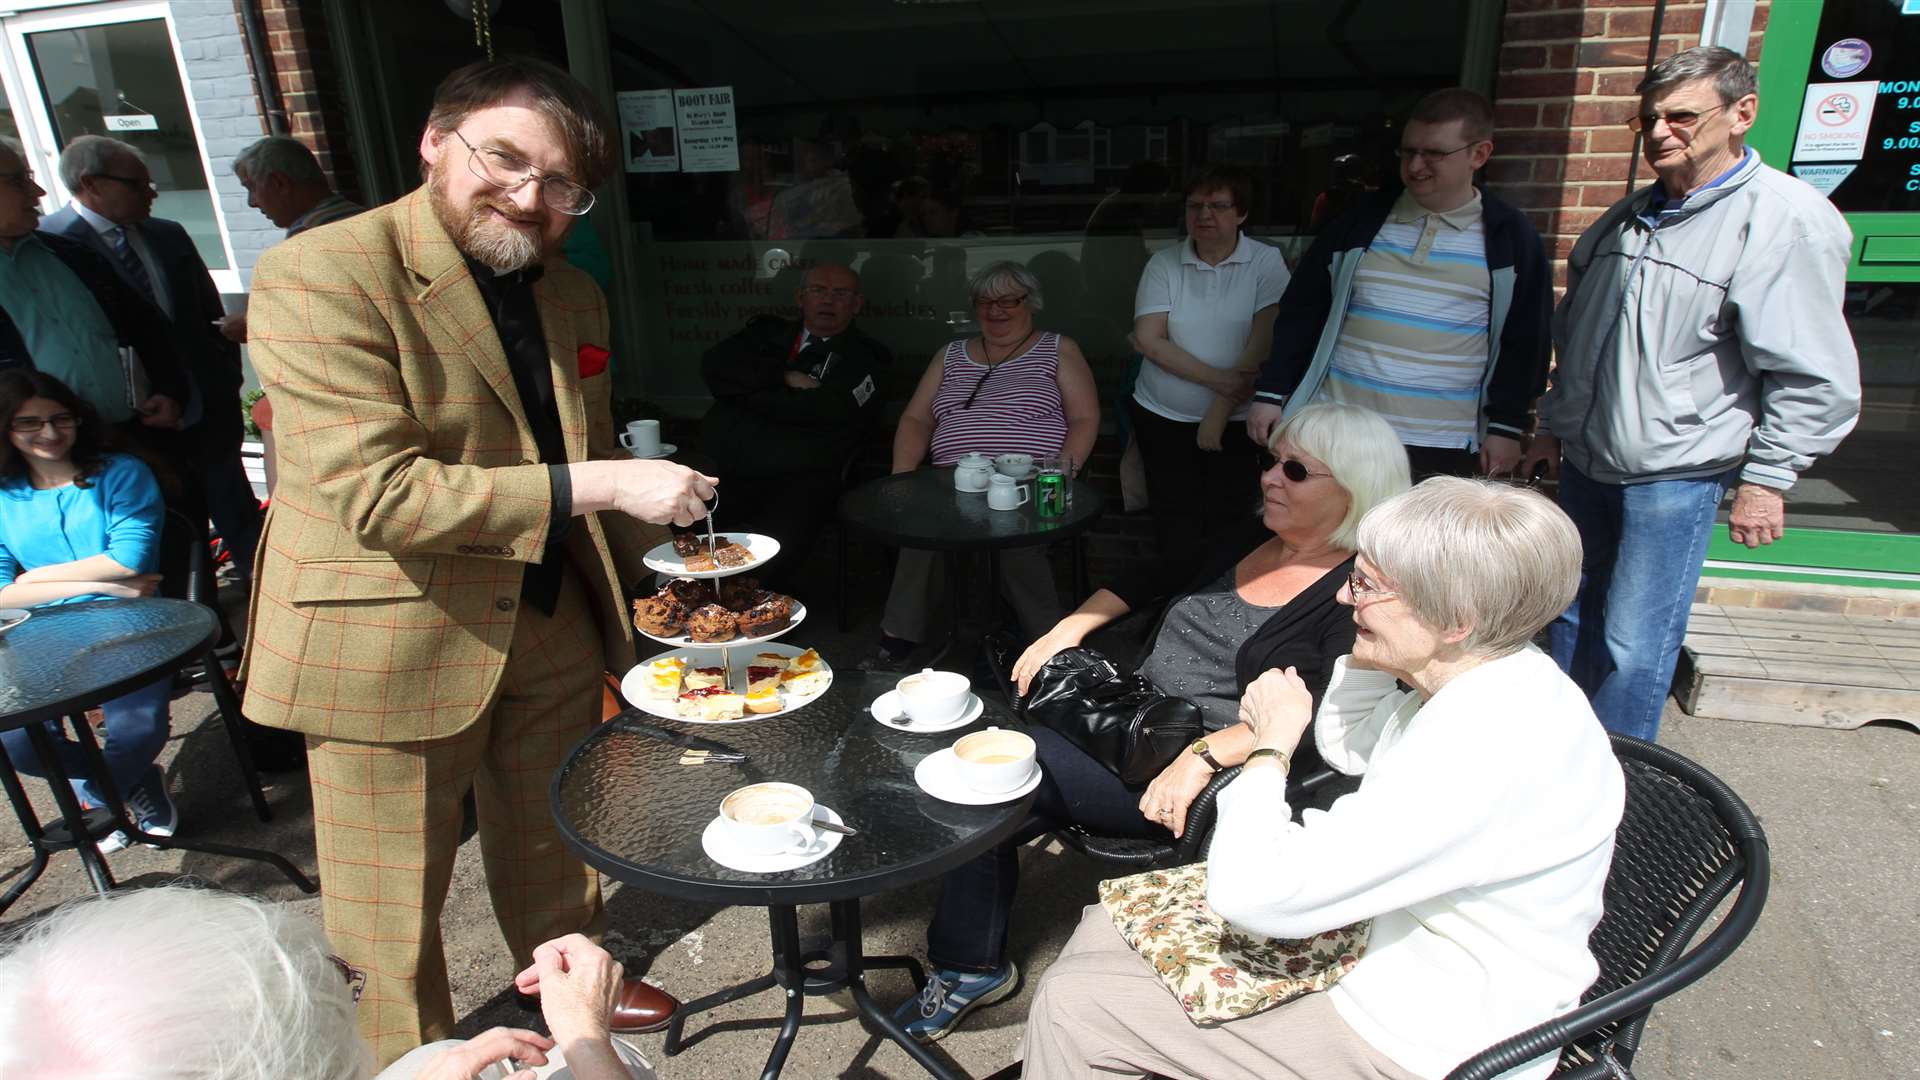 The Rev Nigel Bourne, vicar of Chalk, hands out cakes to guests